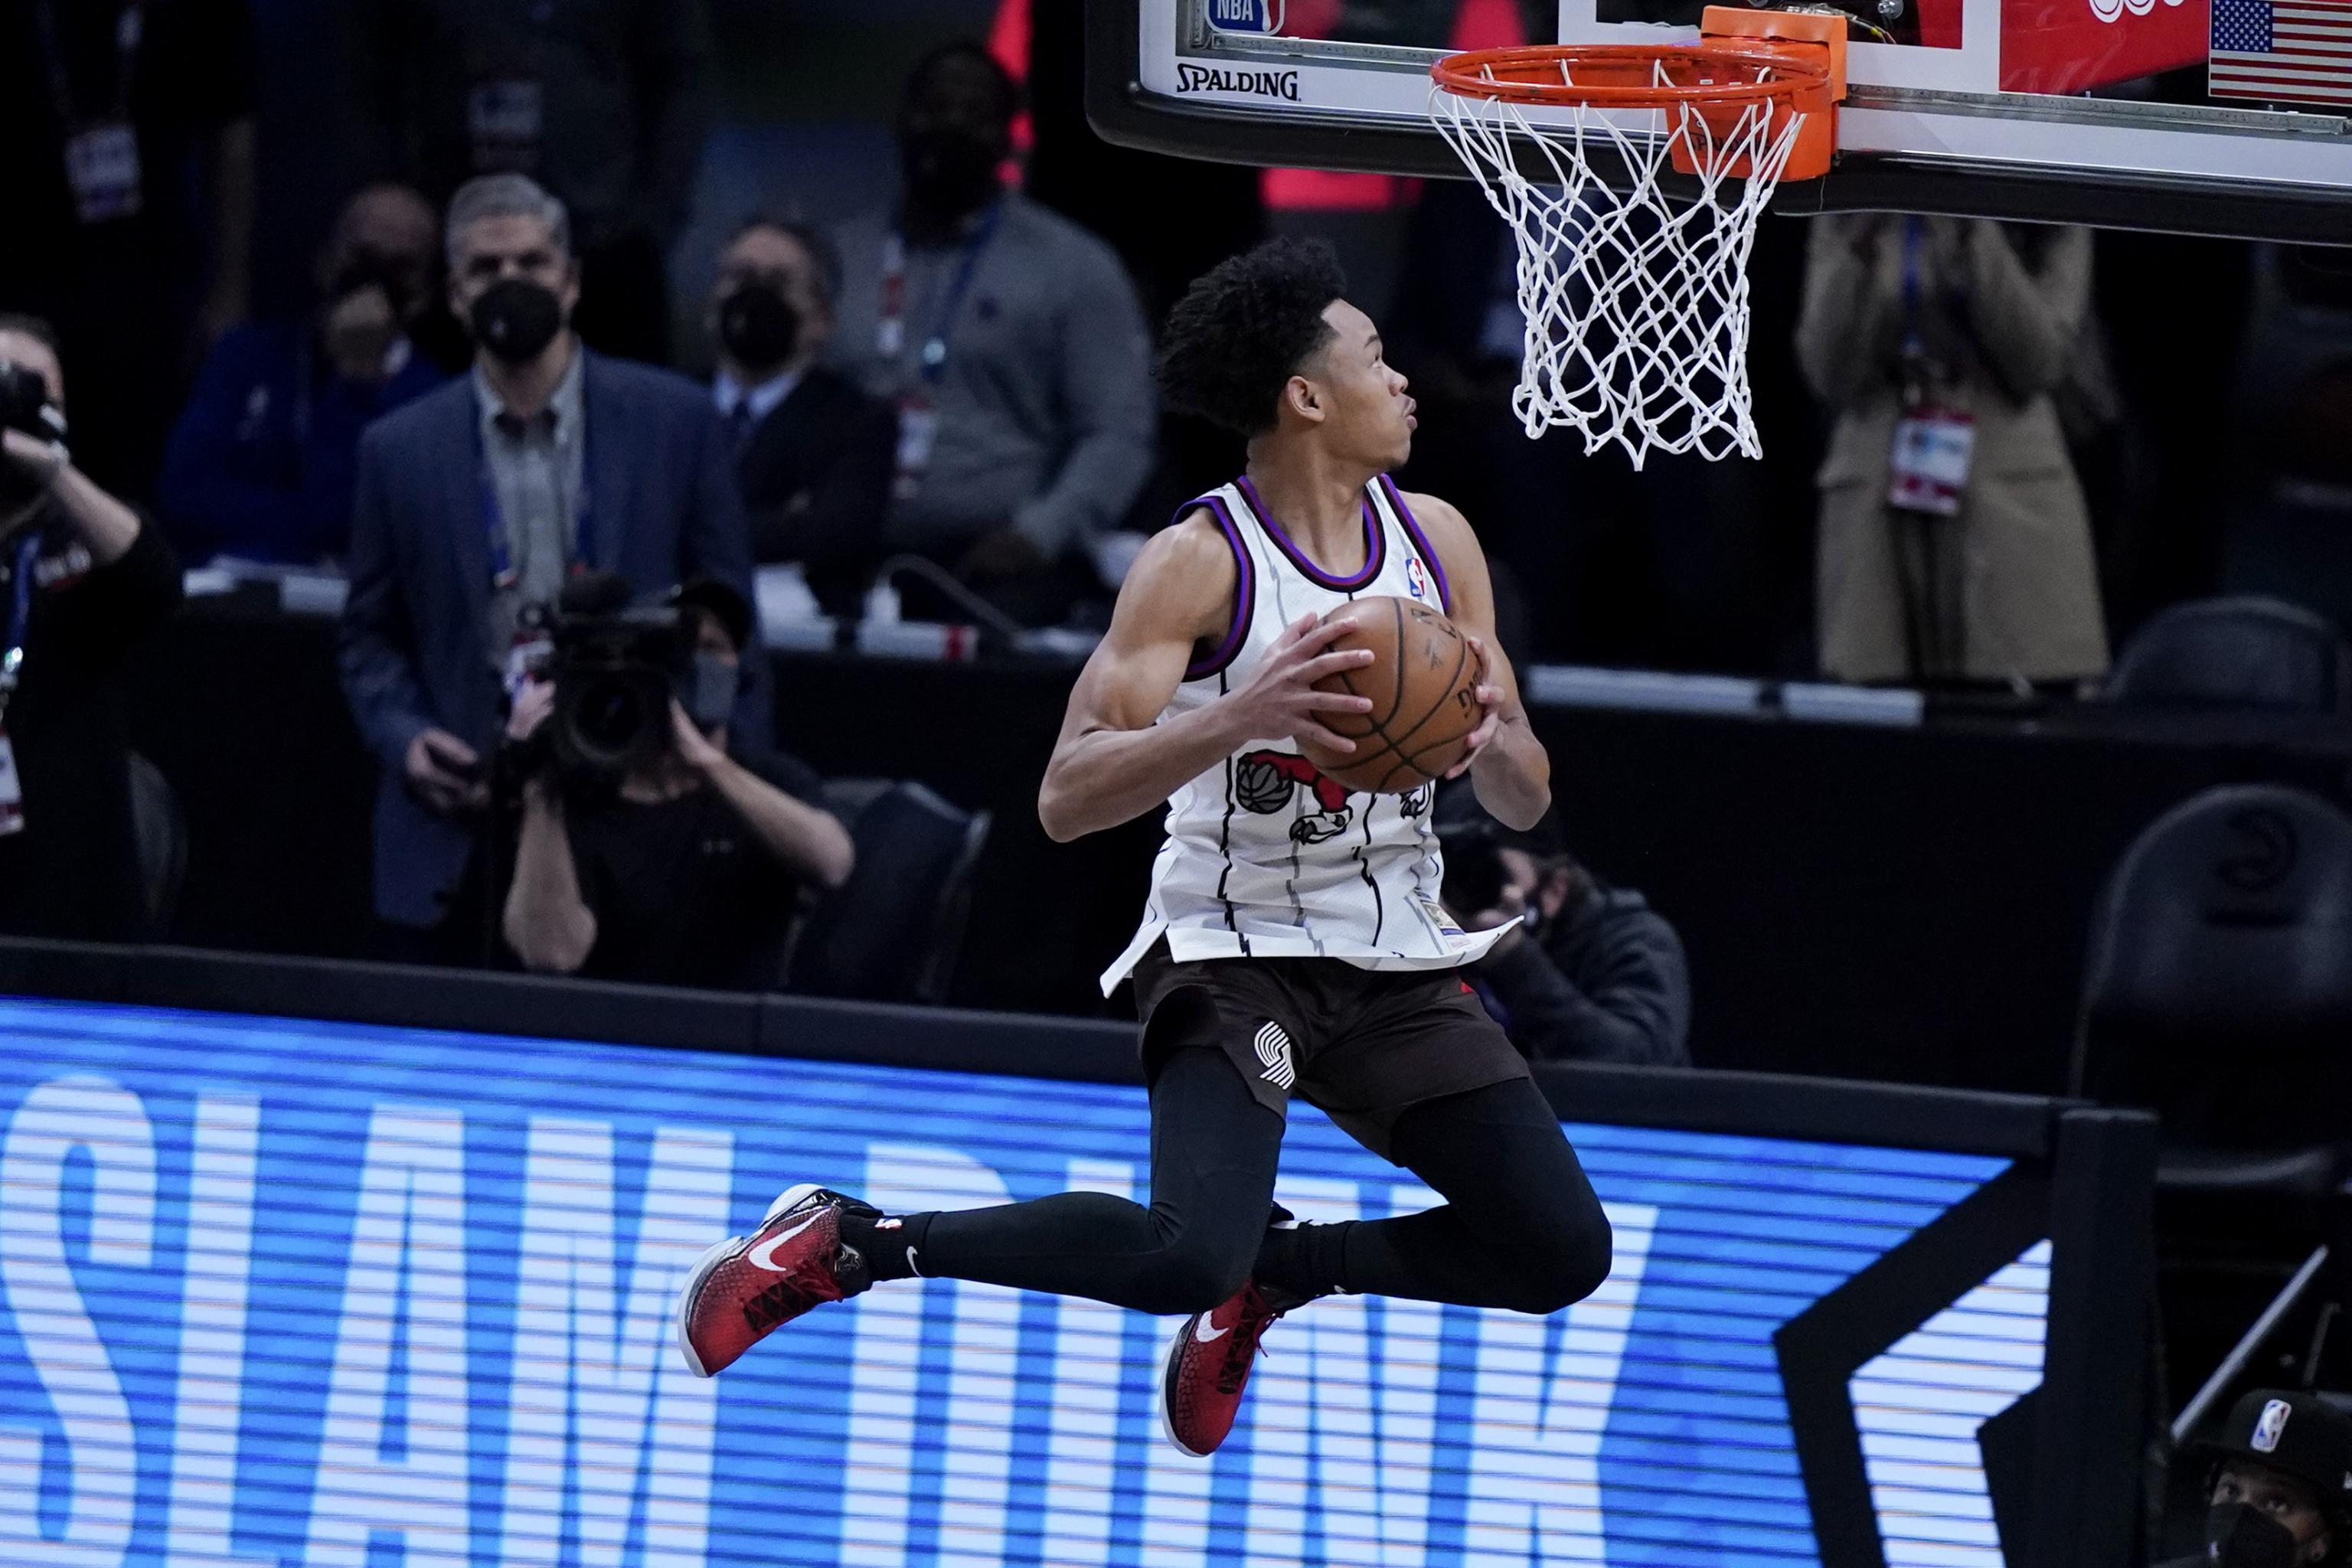 Anfernee Simons' slam dunk win is sealed with a kiss - Los Angeles Times